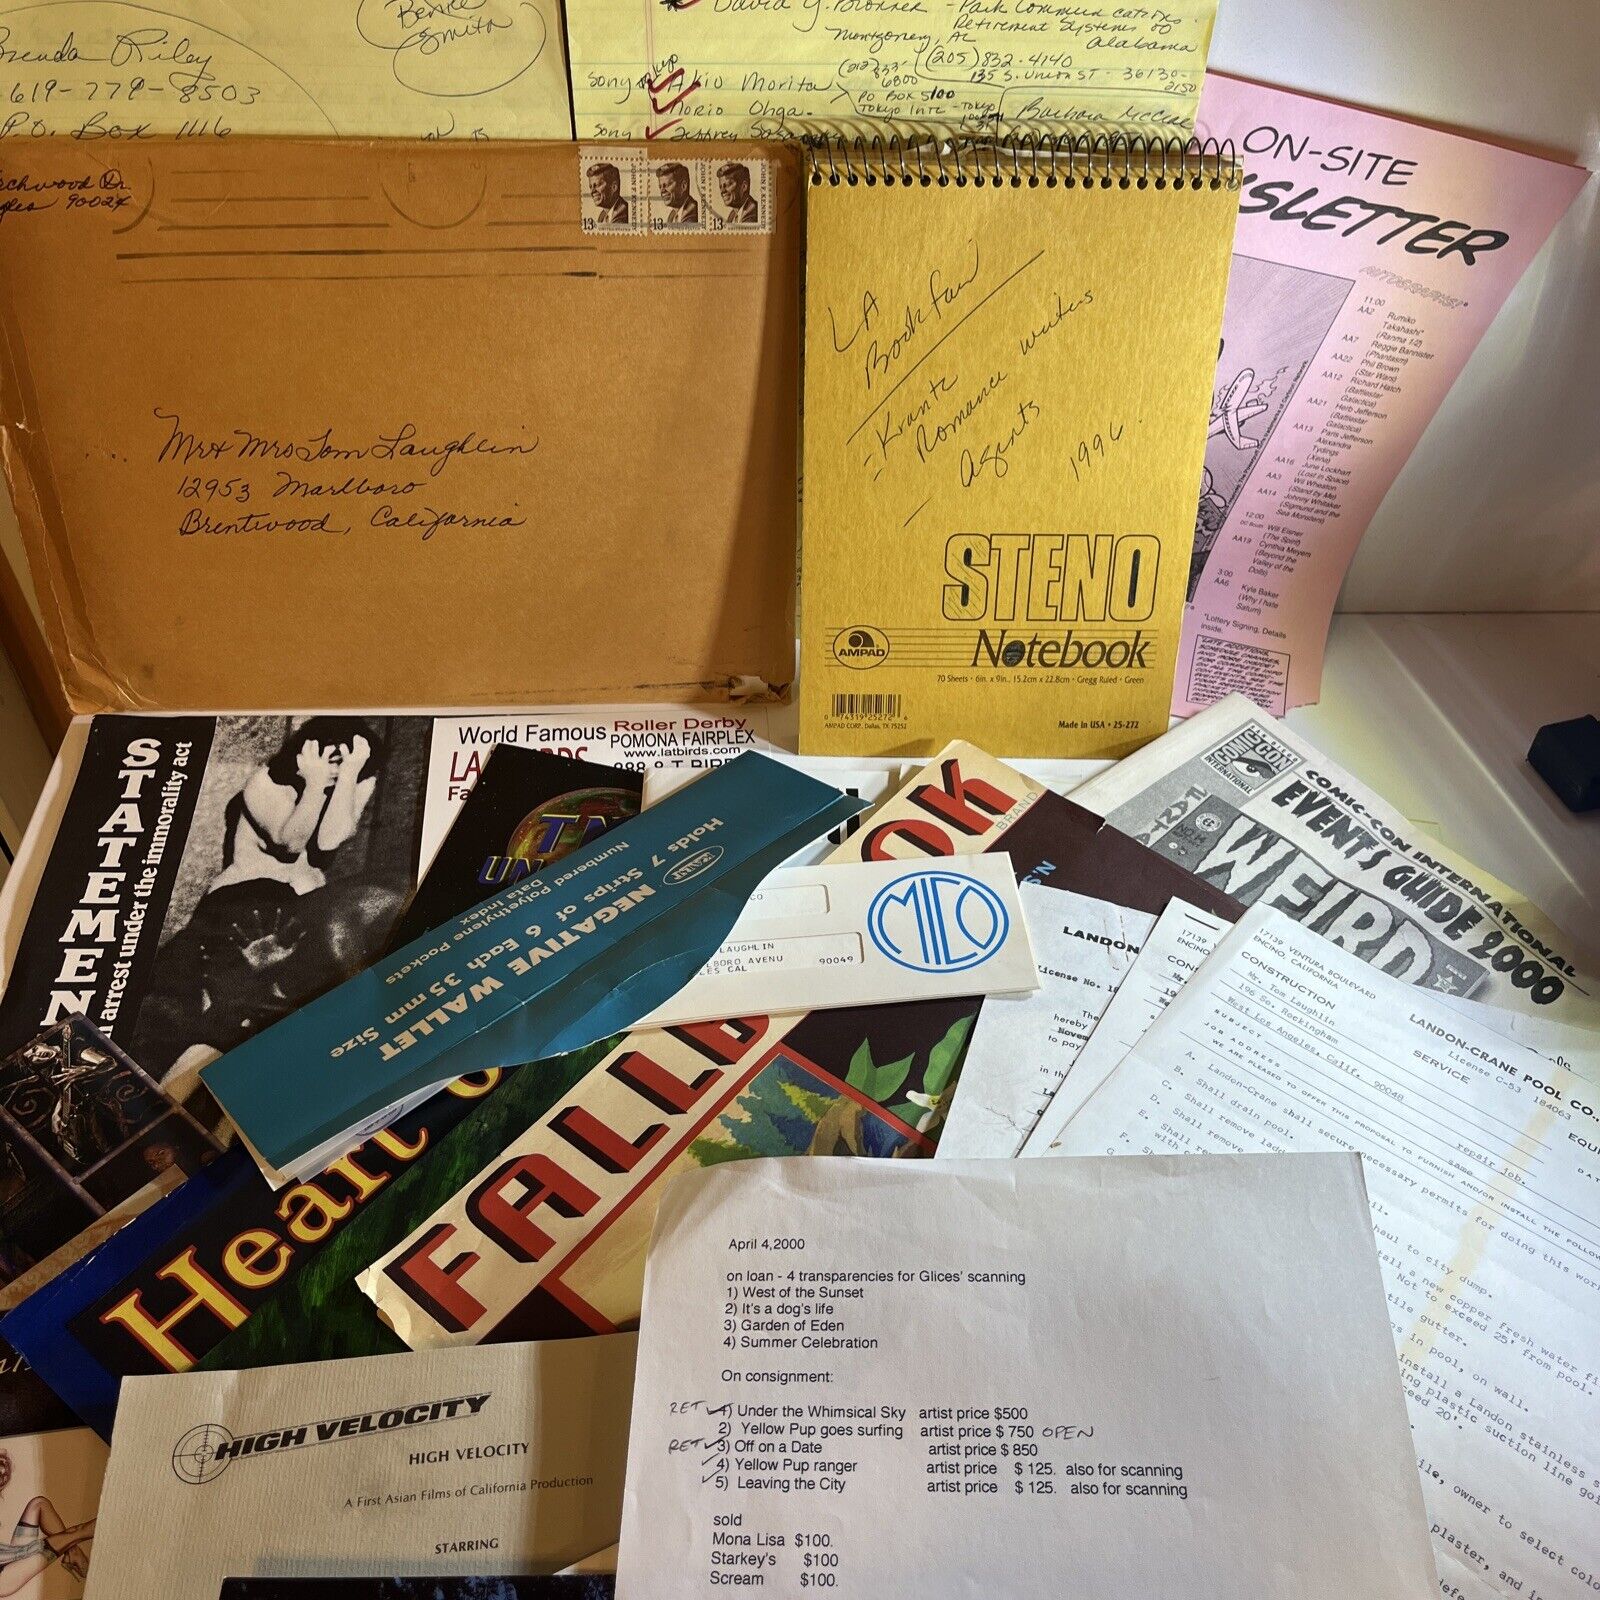 Billy Jack / Tom Laughlin Miscellaneous Documents Papers- Super Fan Alert